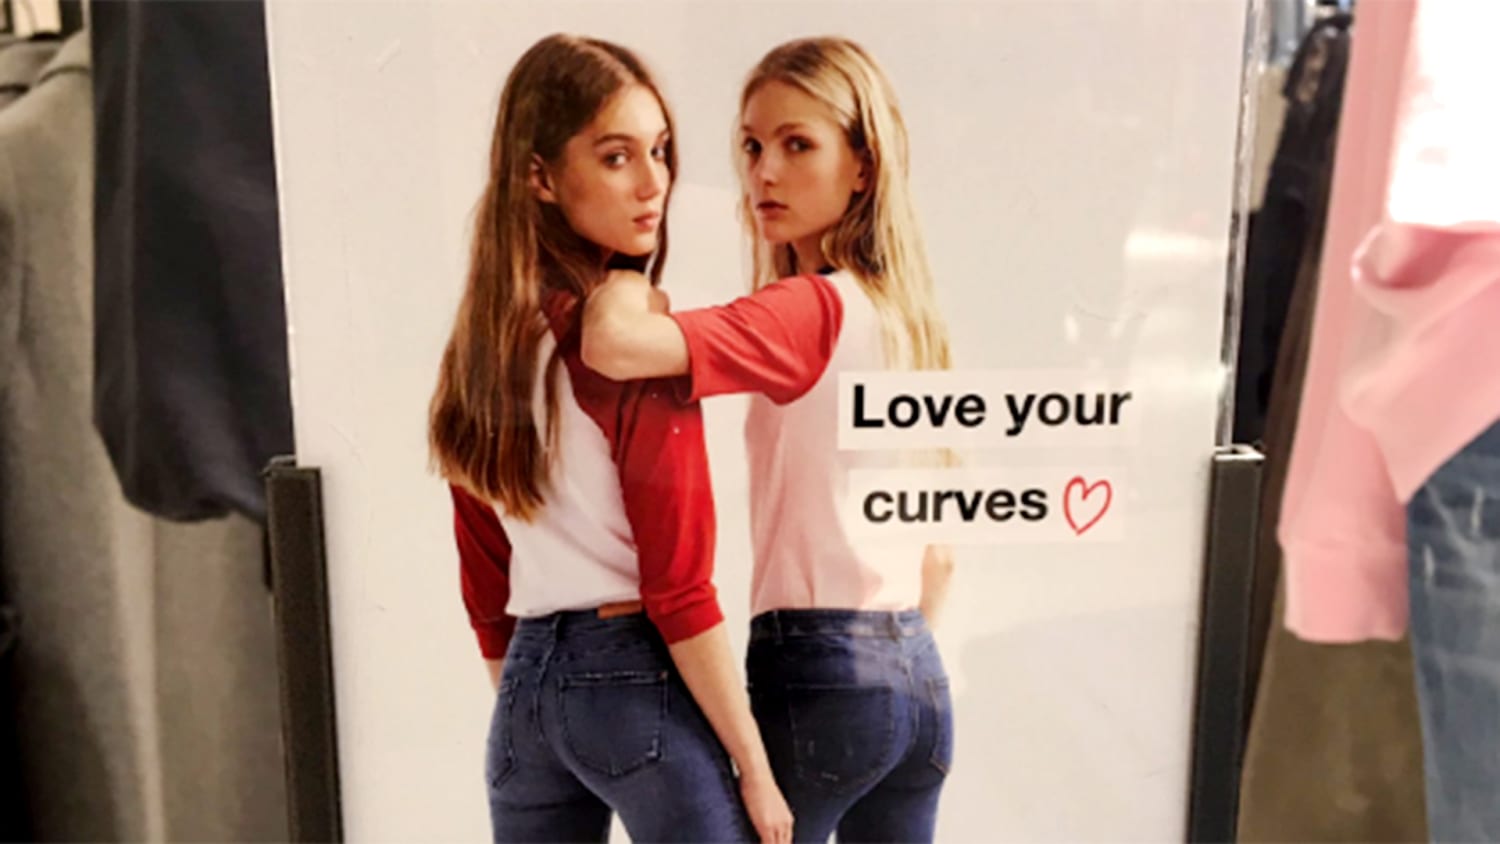 Zara's 'love your curves' campaign results in backlash